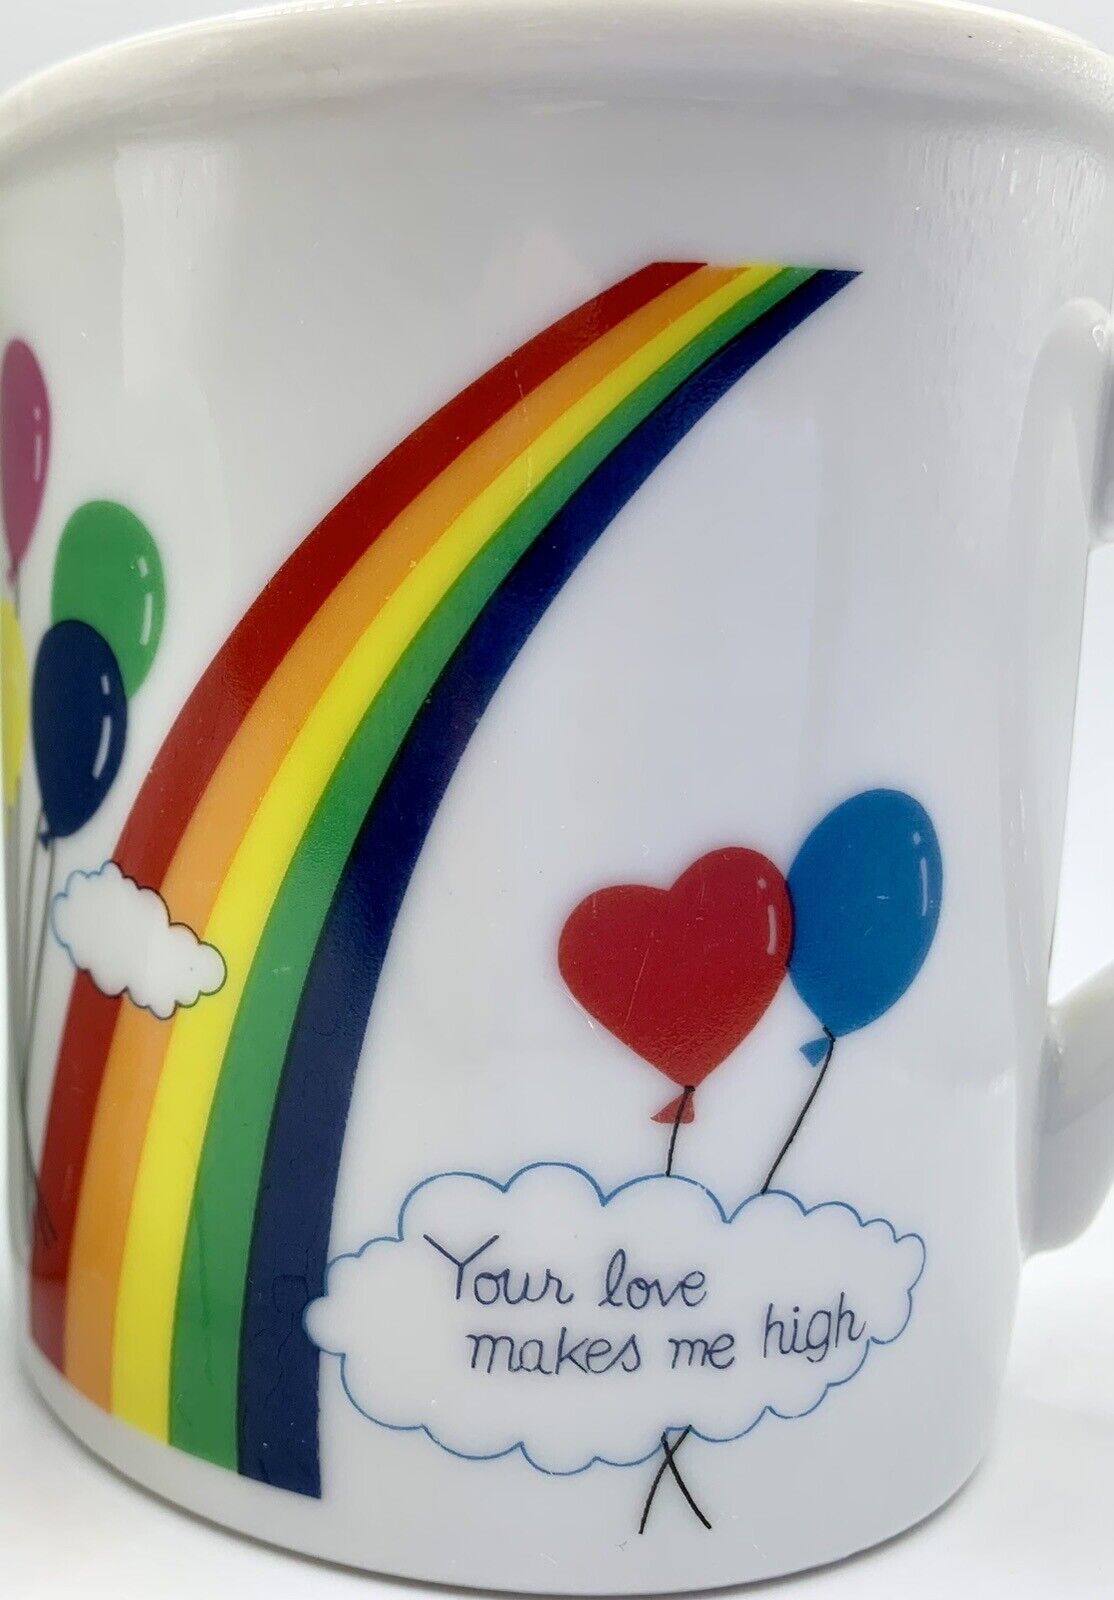 2 Vintage Rainbow 'Your Love Makes Me High' Mugs LGBTQ Pride Partners Couples